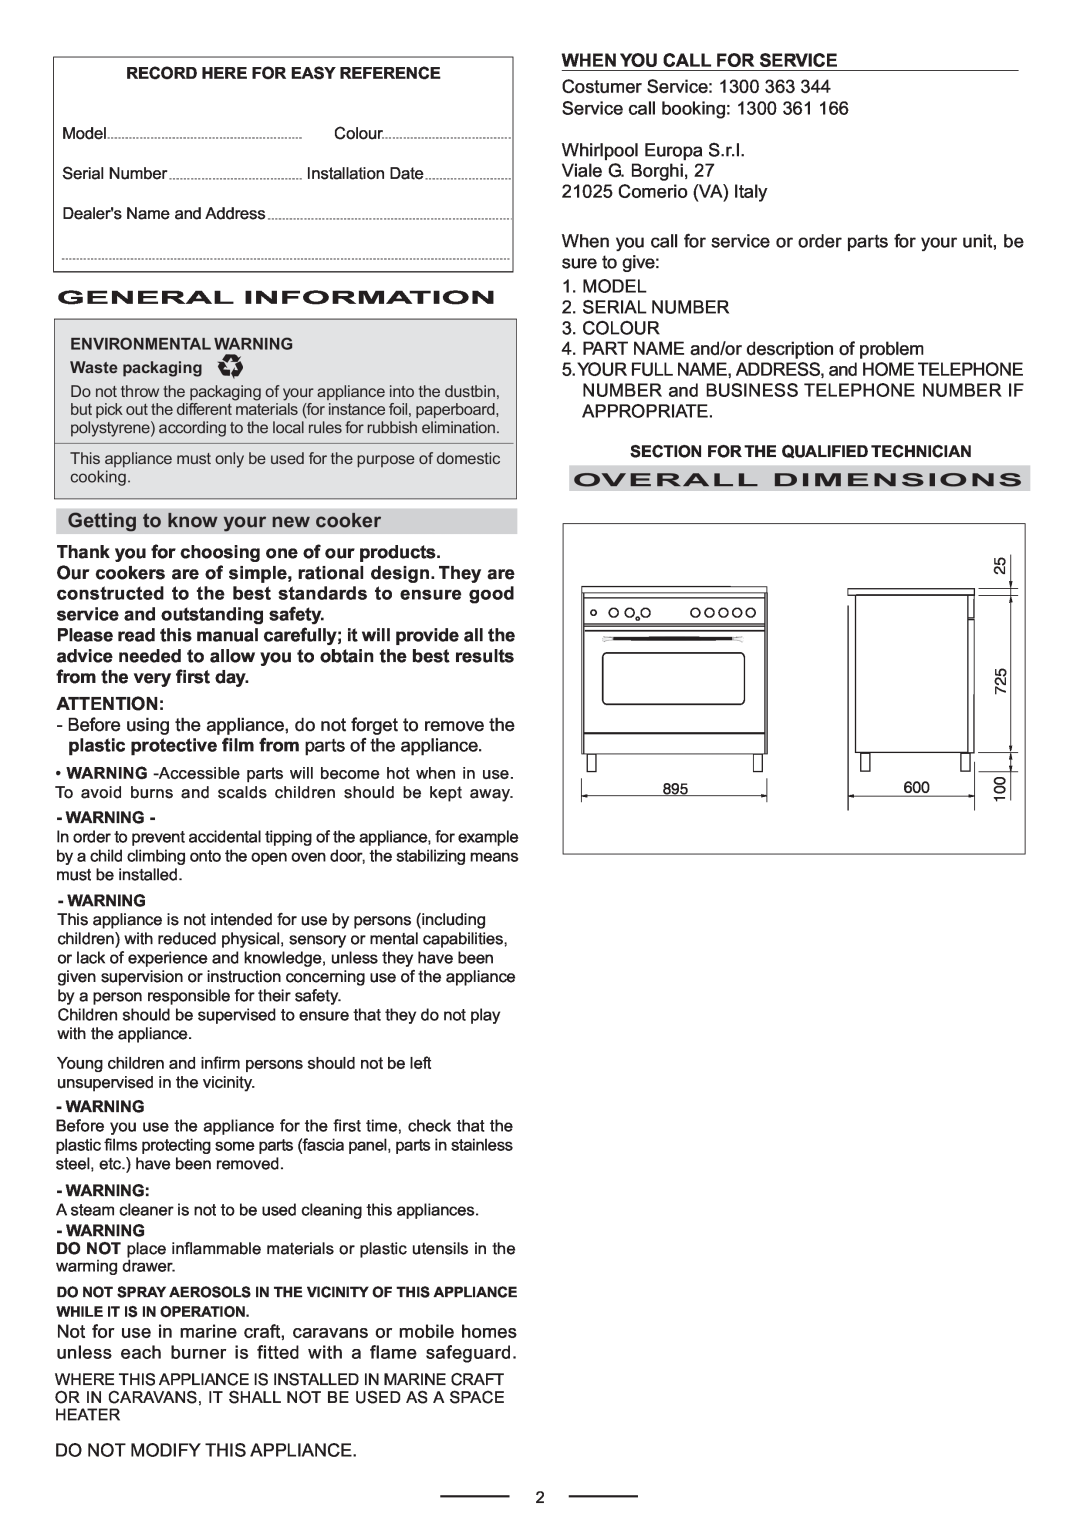 Whirlpool ACG902IX manual Getting to know your new cooker, General Information, Thank you for choosing one of our products 